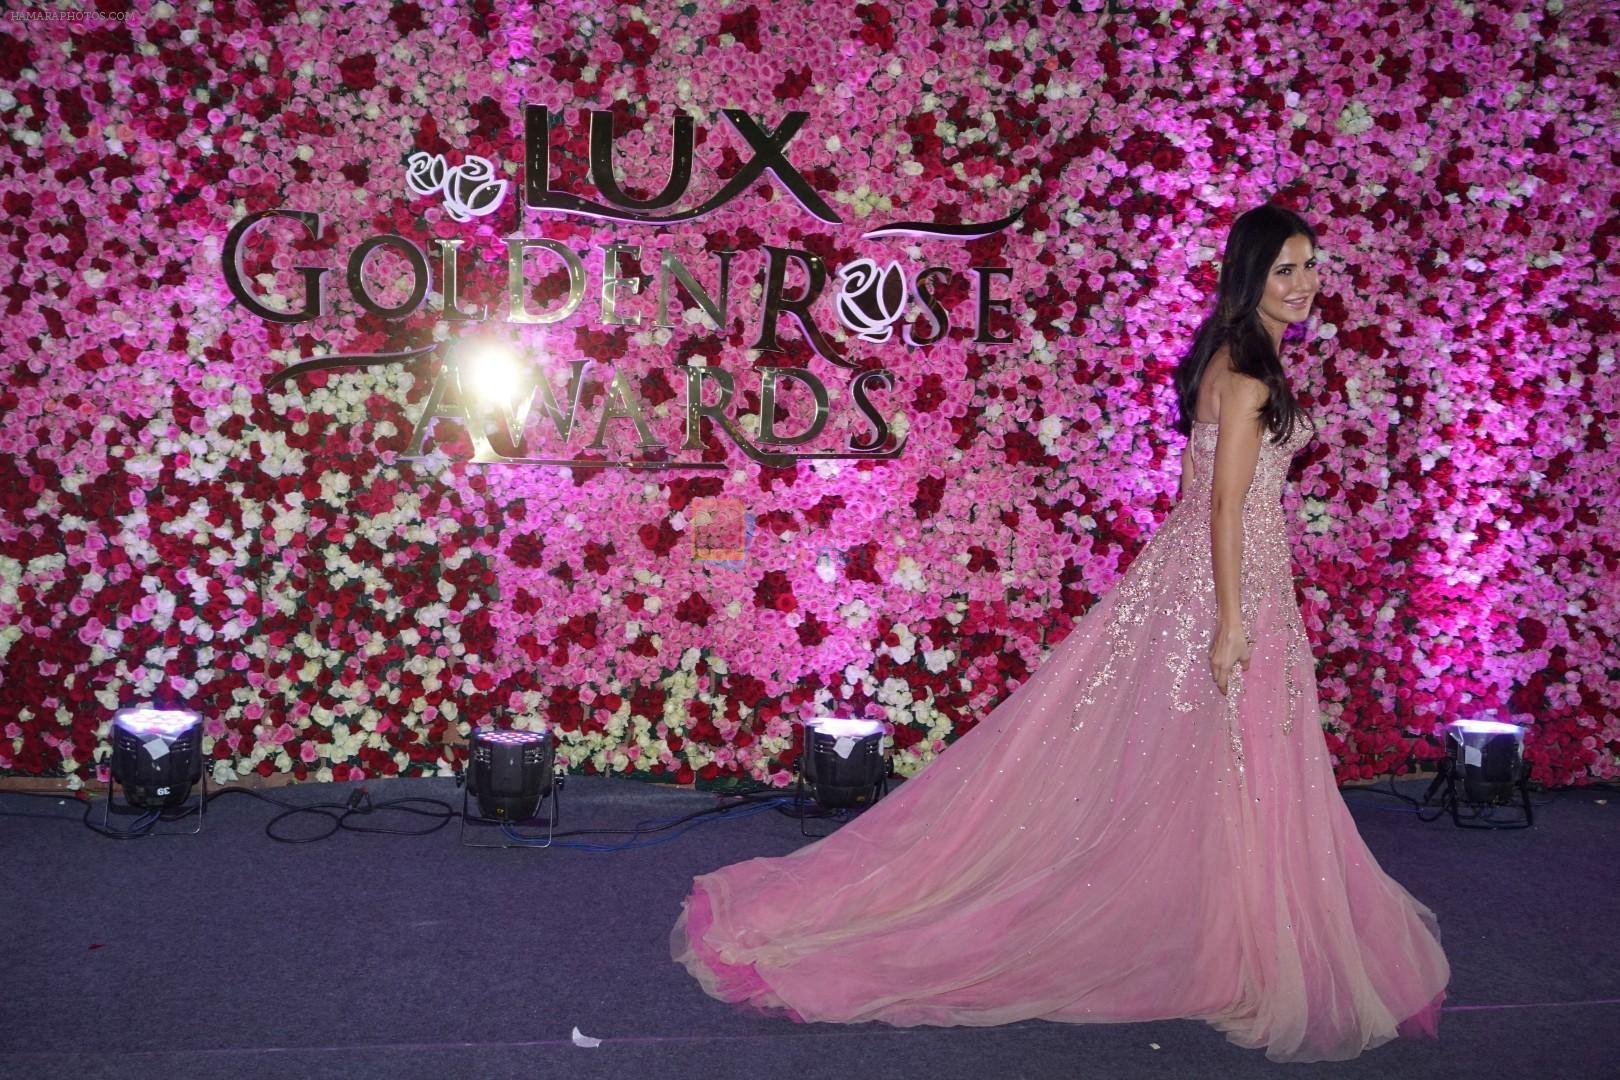 Katrina Kaif at the Red Carpet Of Lux Golden Rose Awards 2017 on 10th Dec 2017